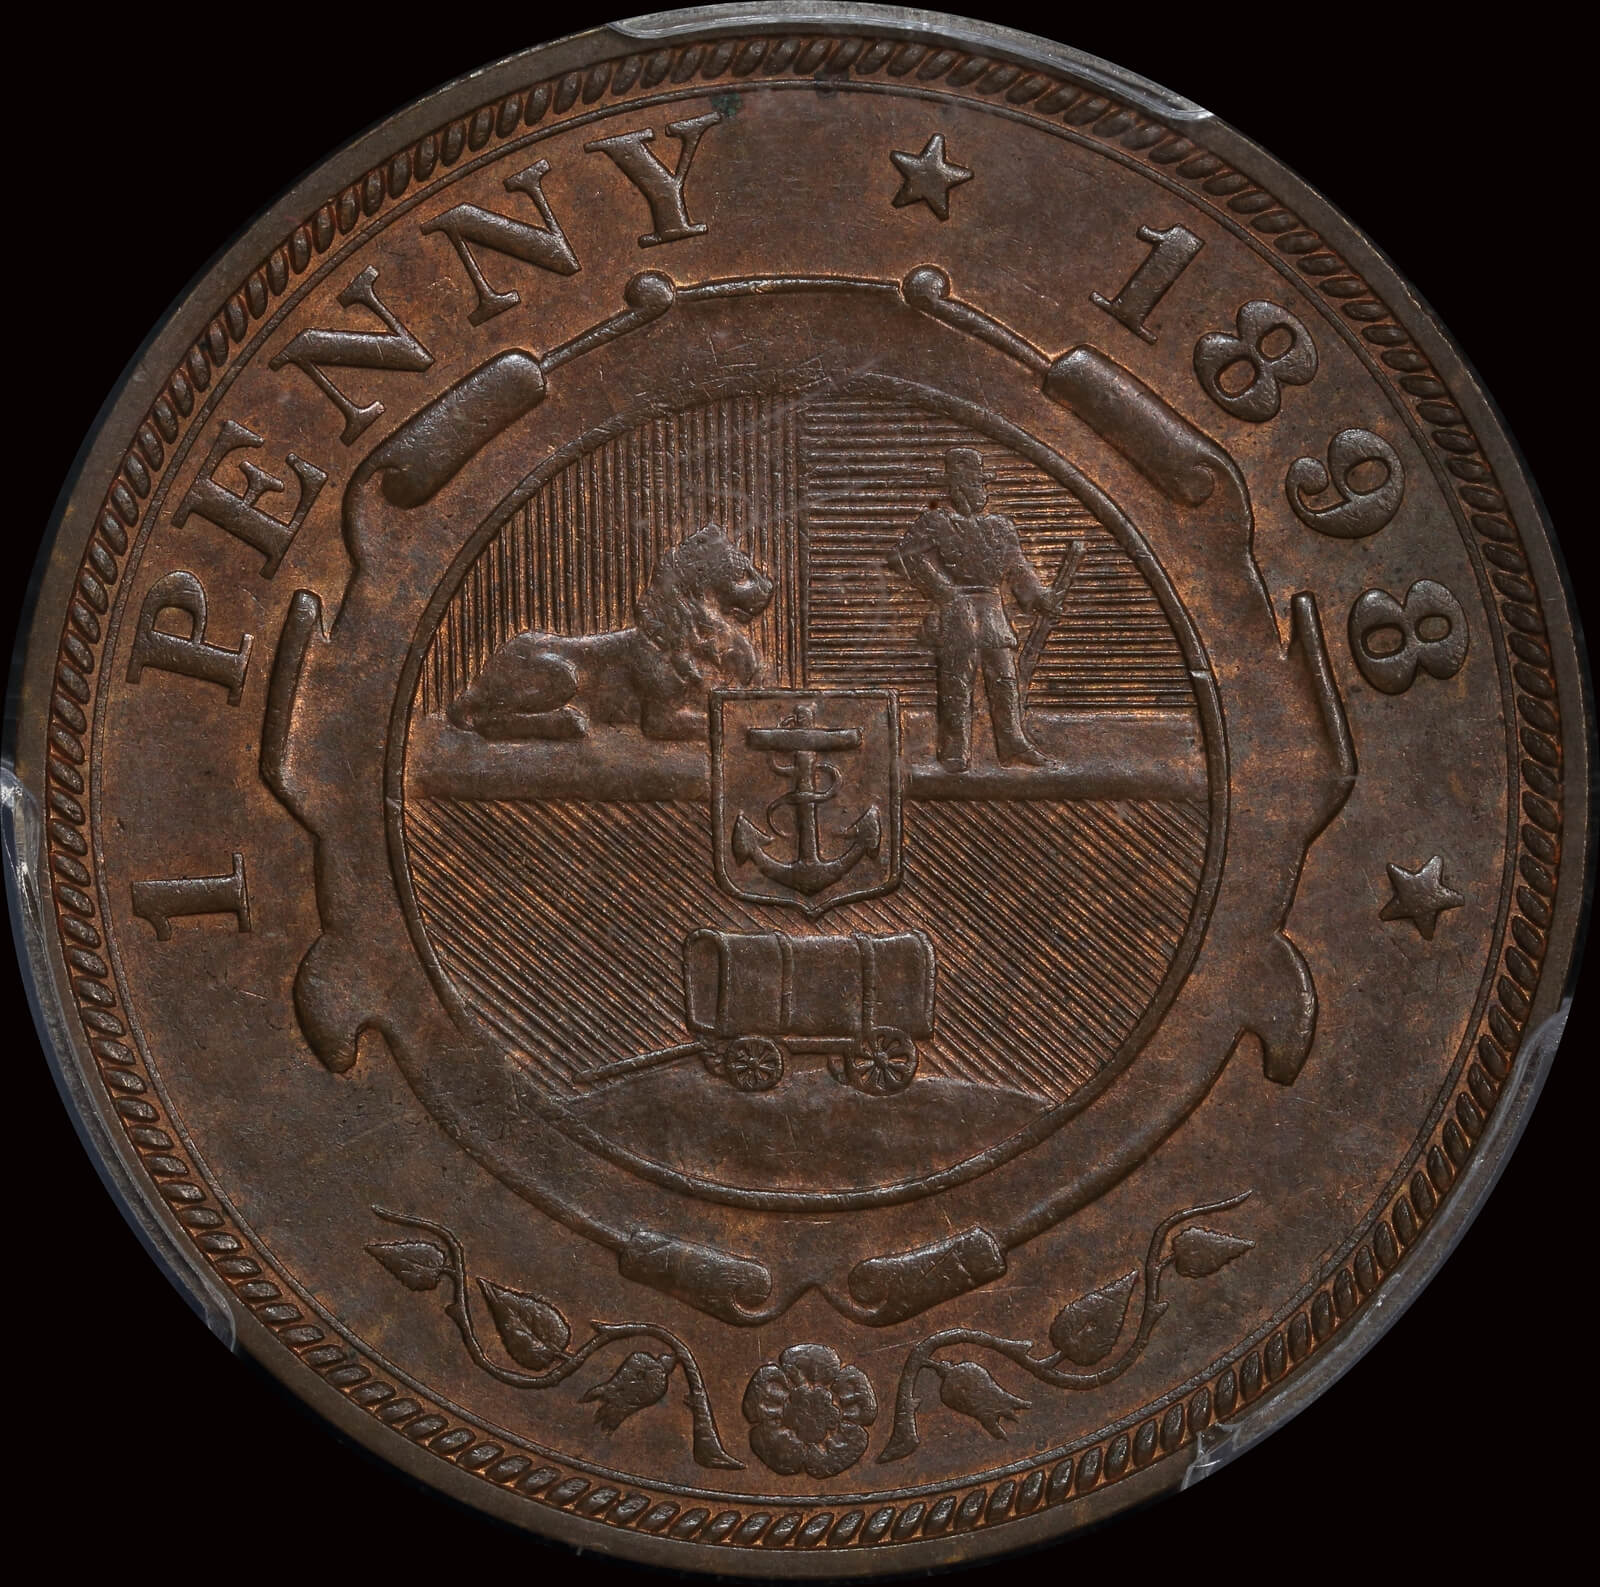 South Africa 1898 Copper Penny KM#2 PCGS MS63BN product image